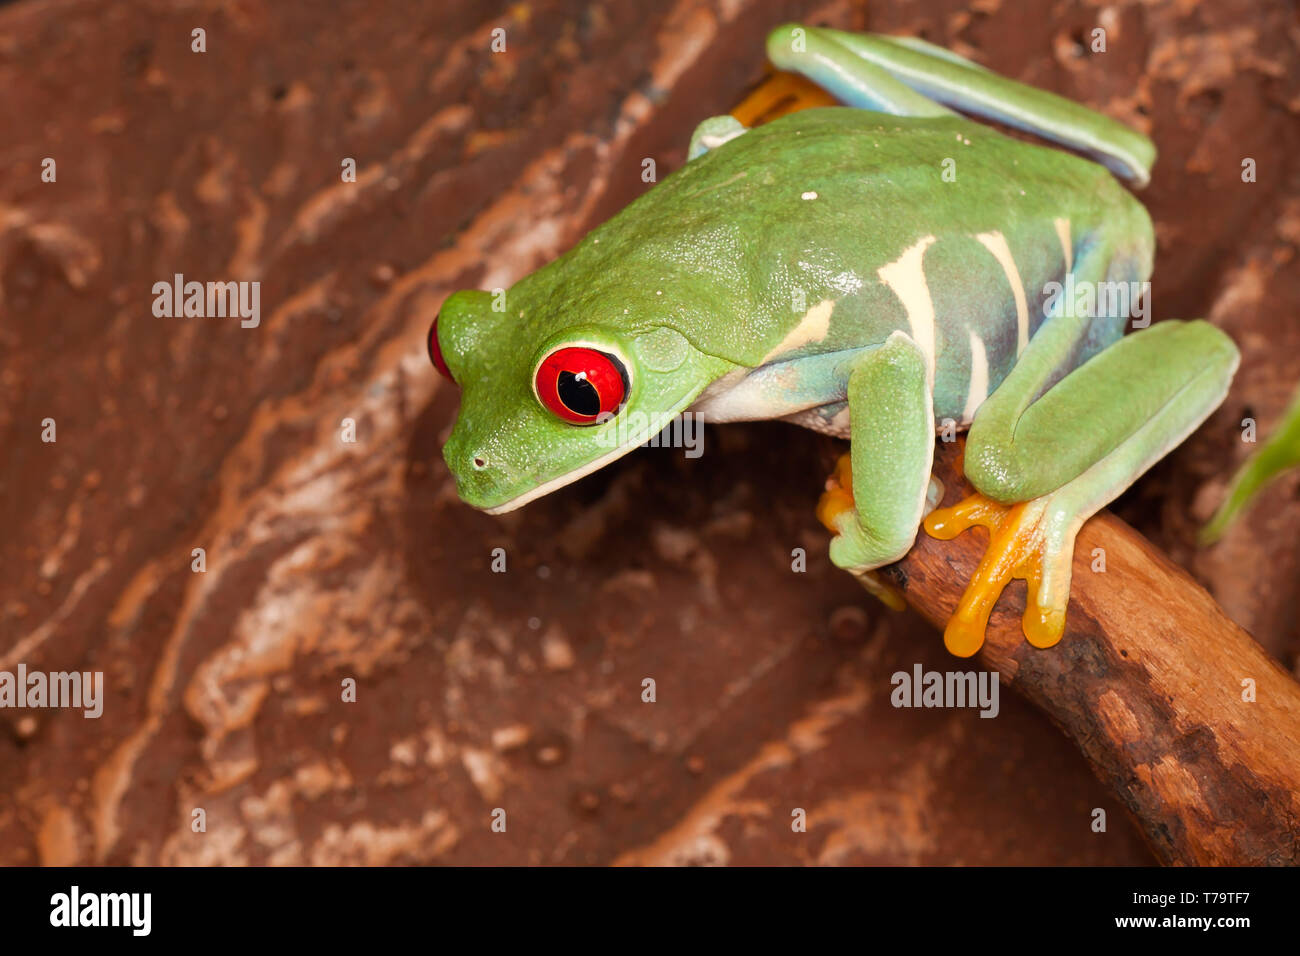 Red-eyed tree frog looking down Banque D'Images